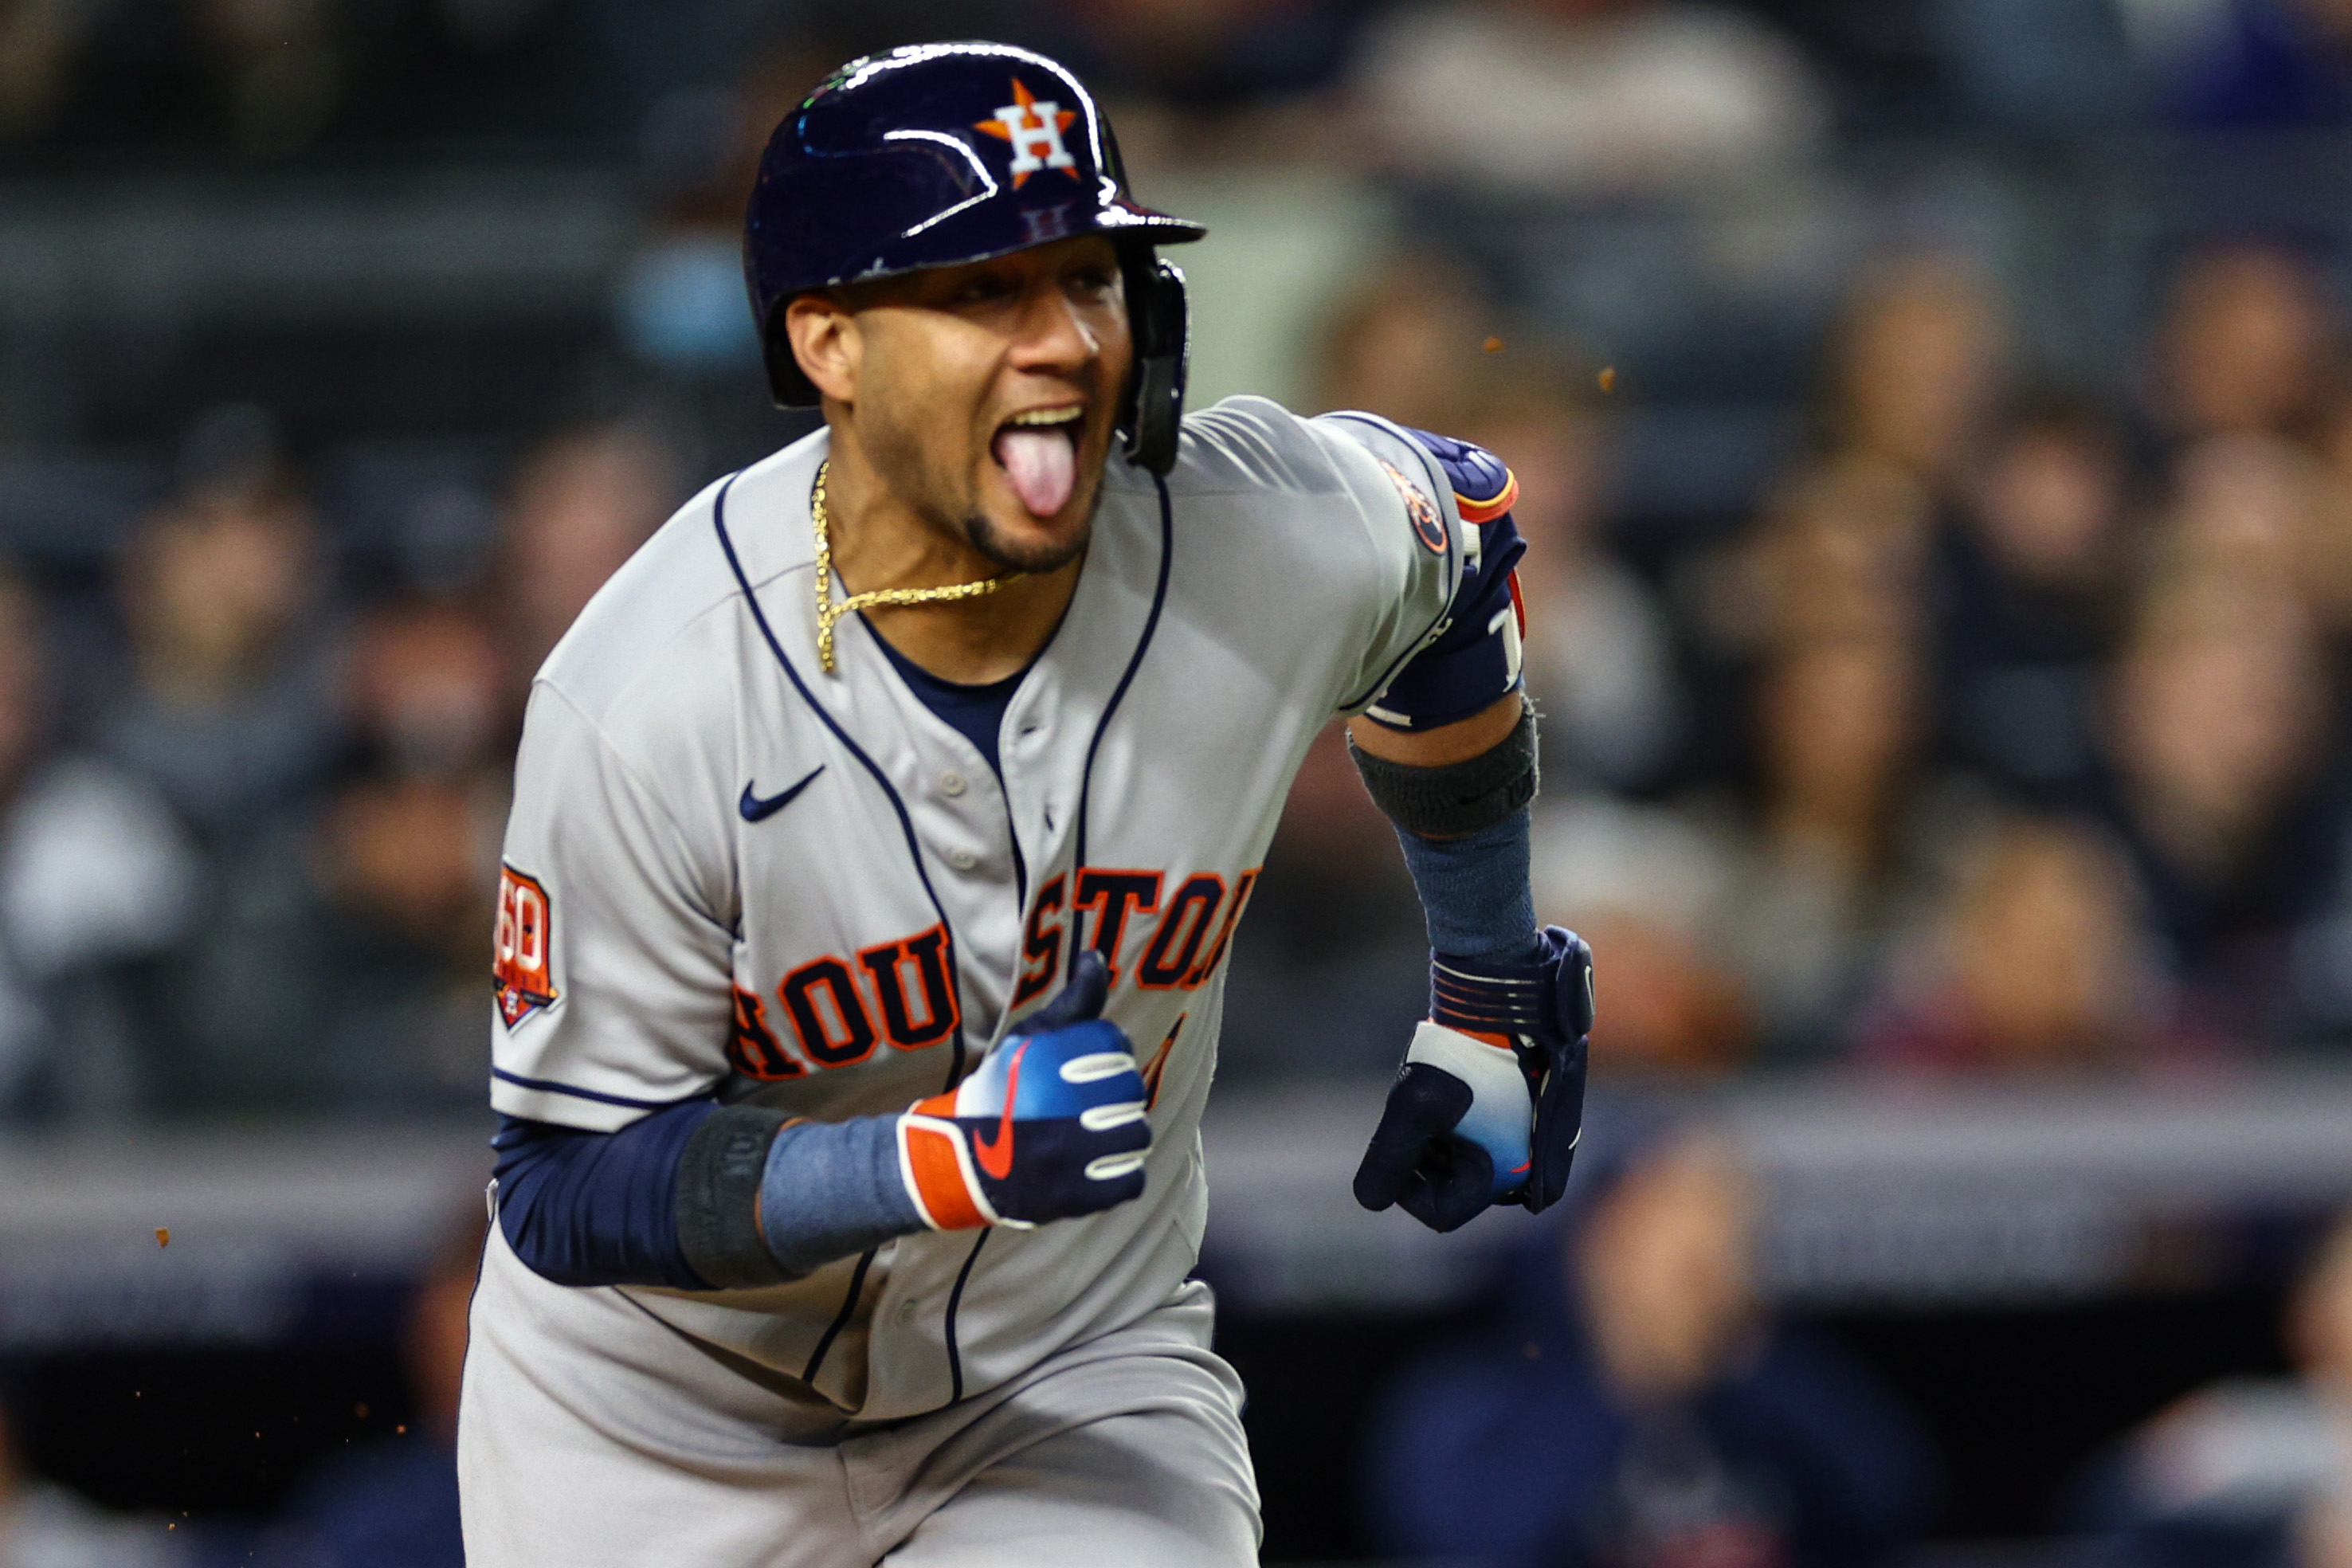 PHOTOS: The Houston Astros are headed to the World Series! Here's